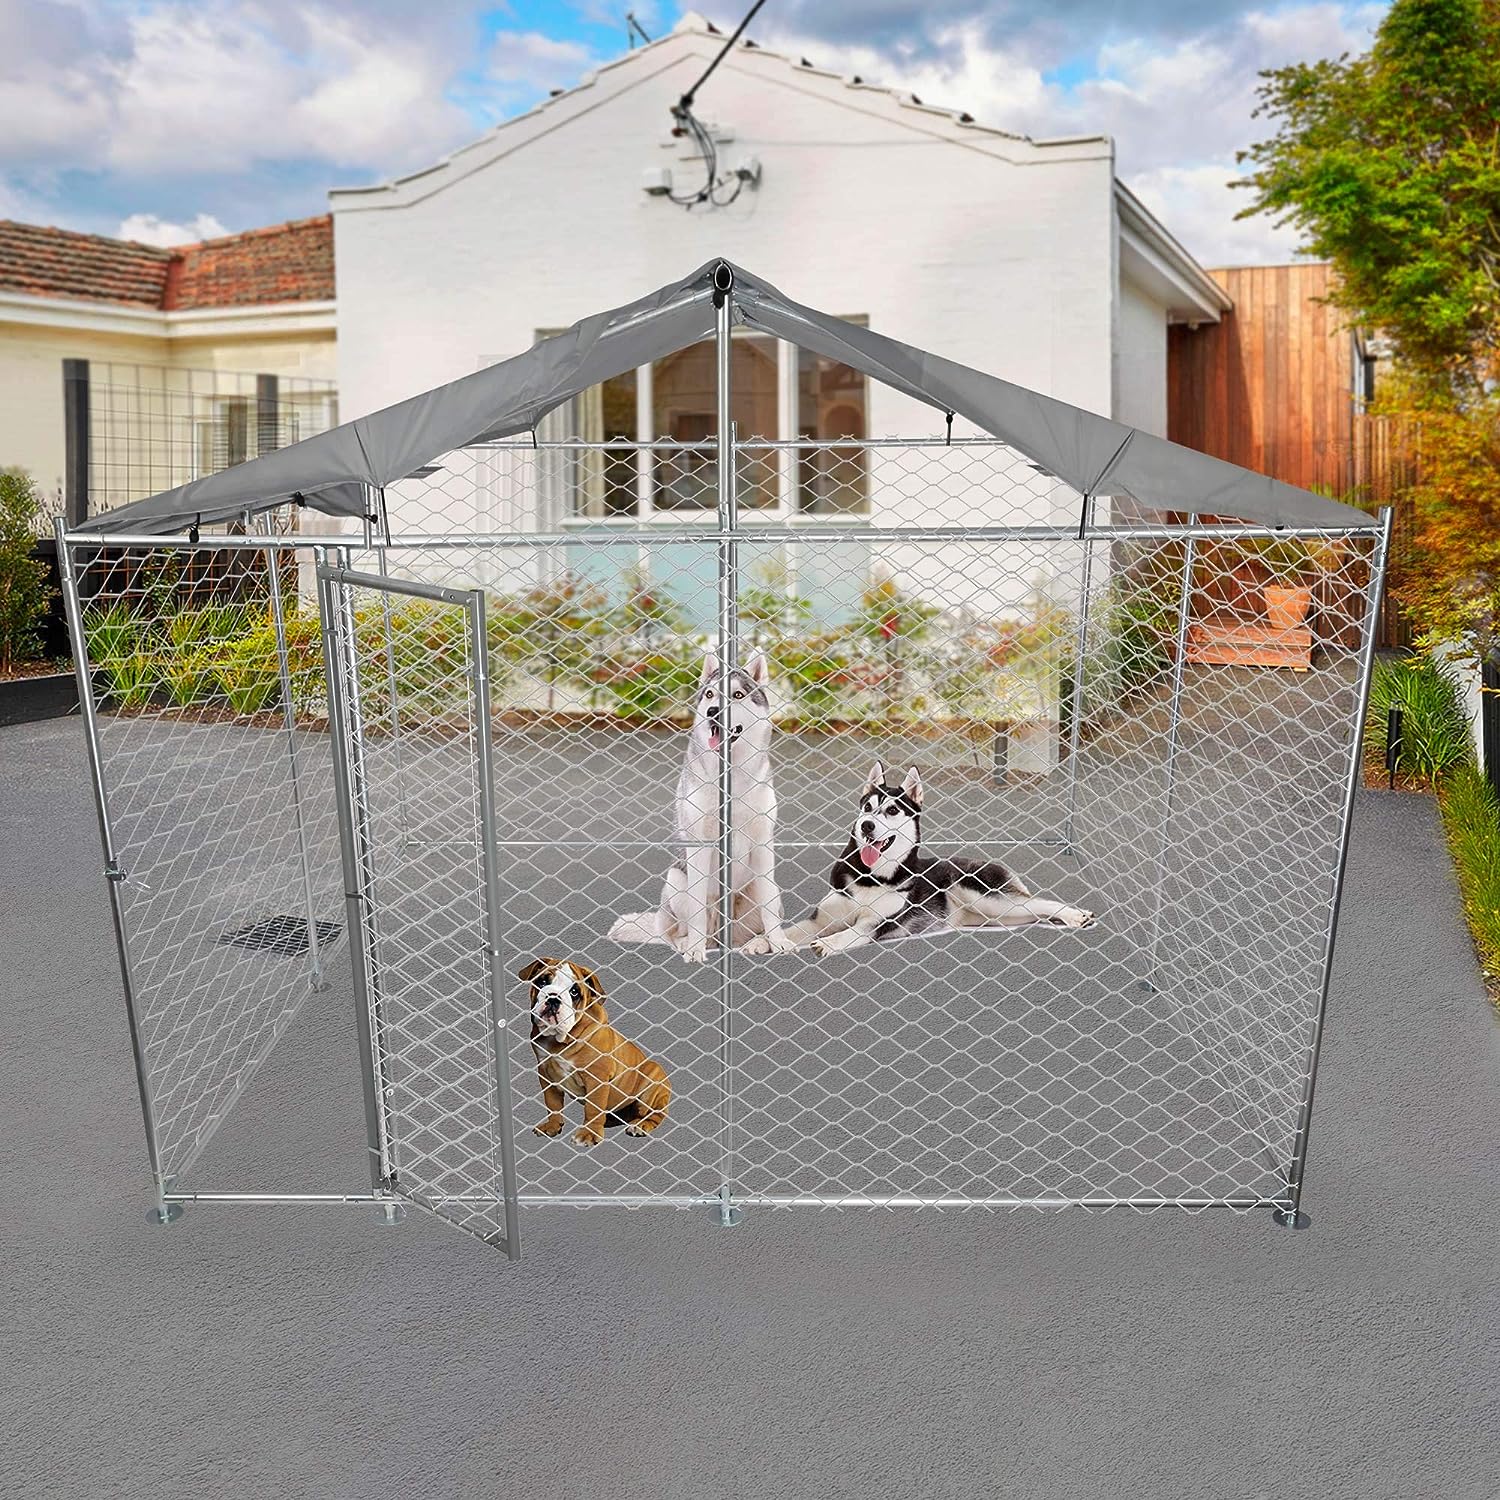 9.8'x9.8'x7.5' Large Outdoor Dog Kennel Galvanized Steel Pet Playpen with Waterproof Cover Secure Lock